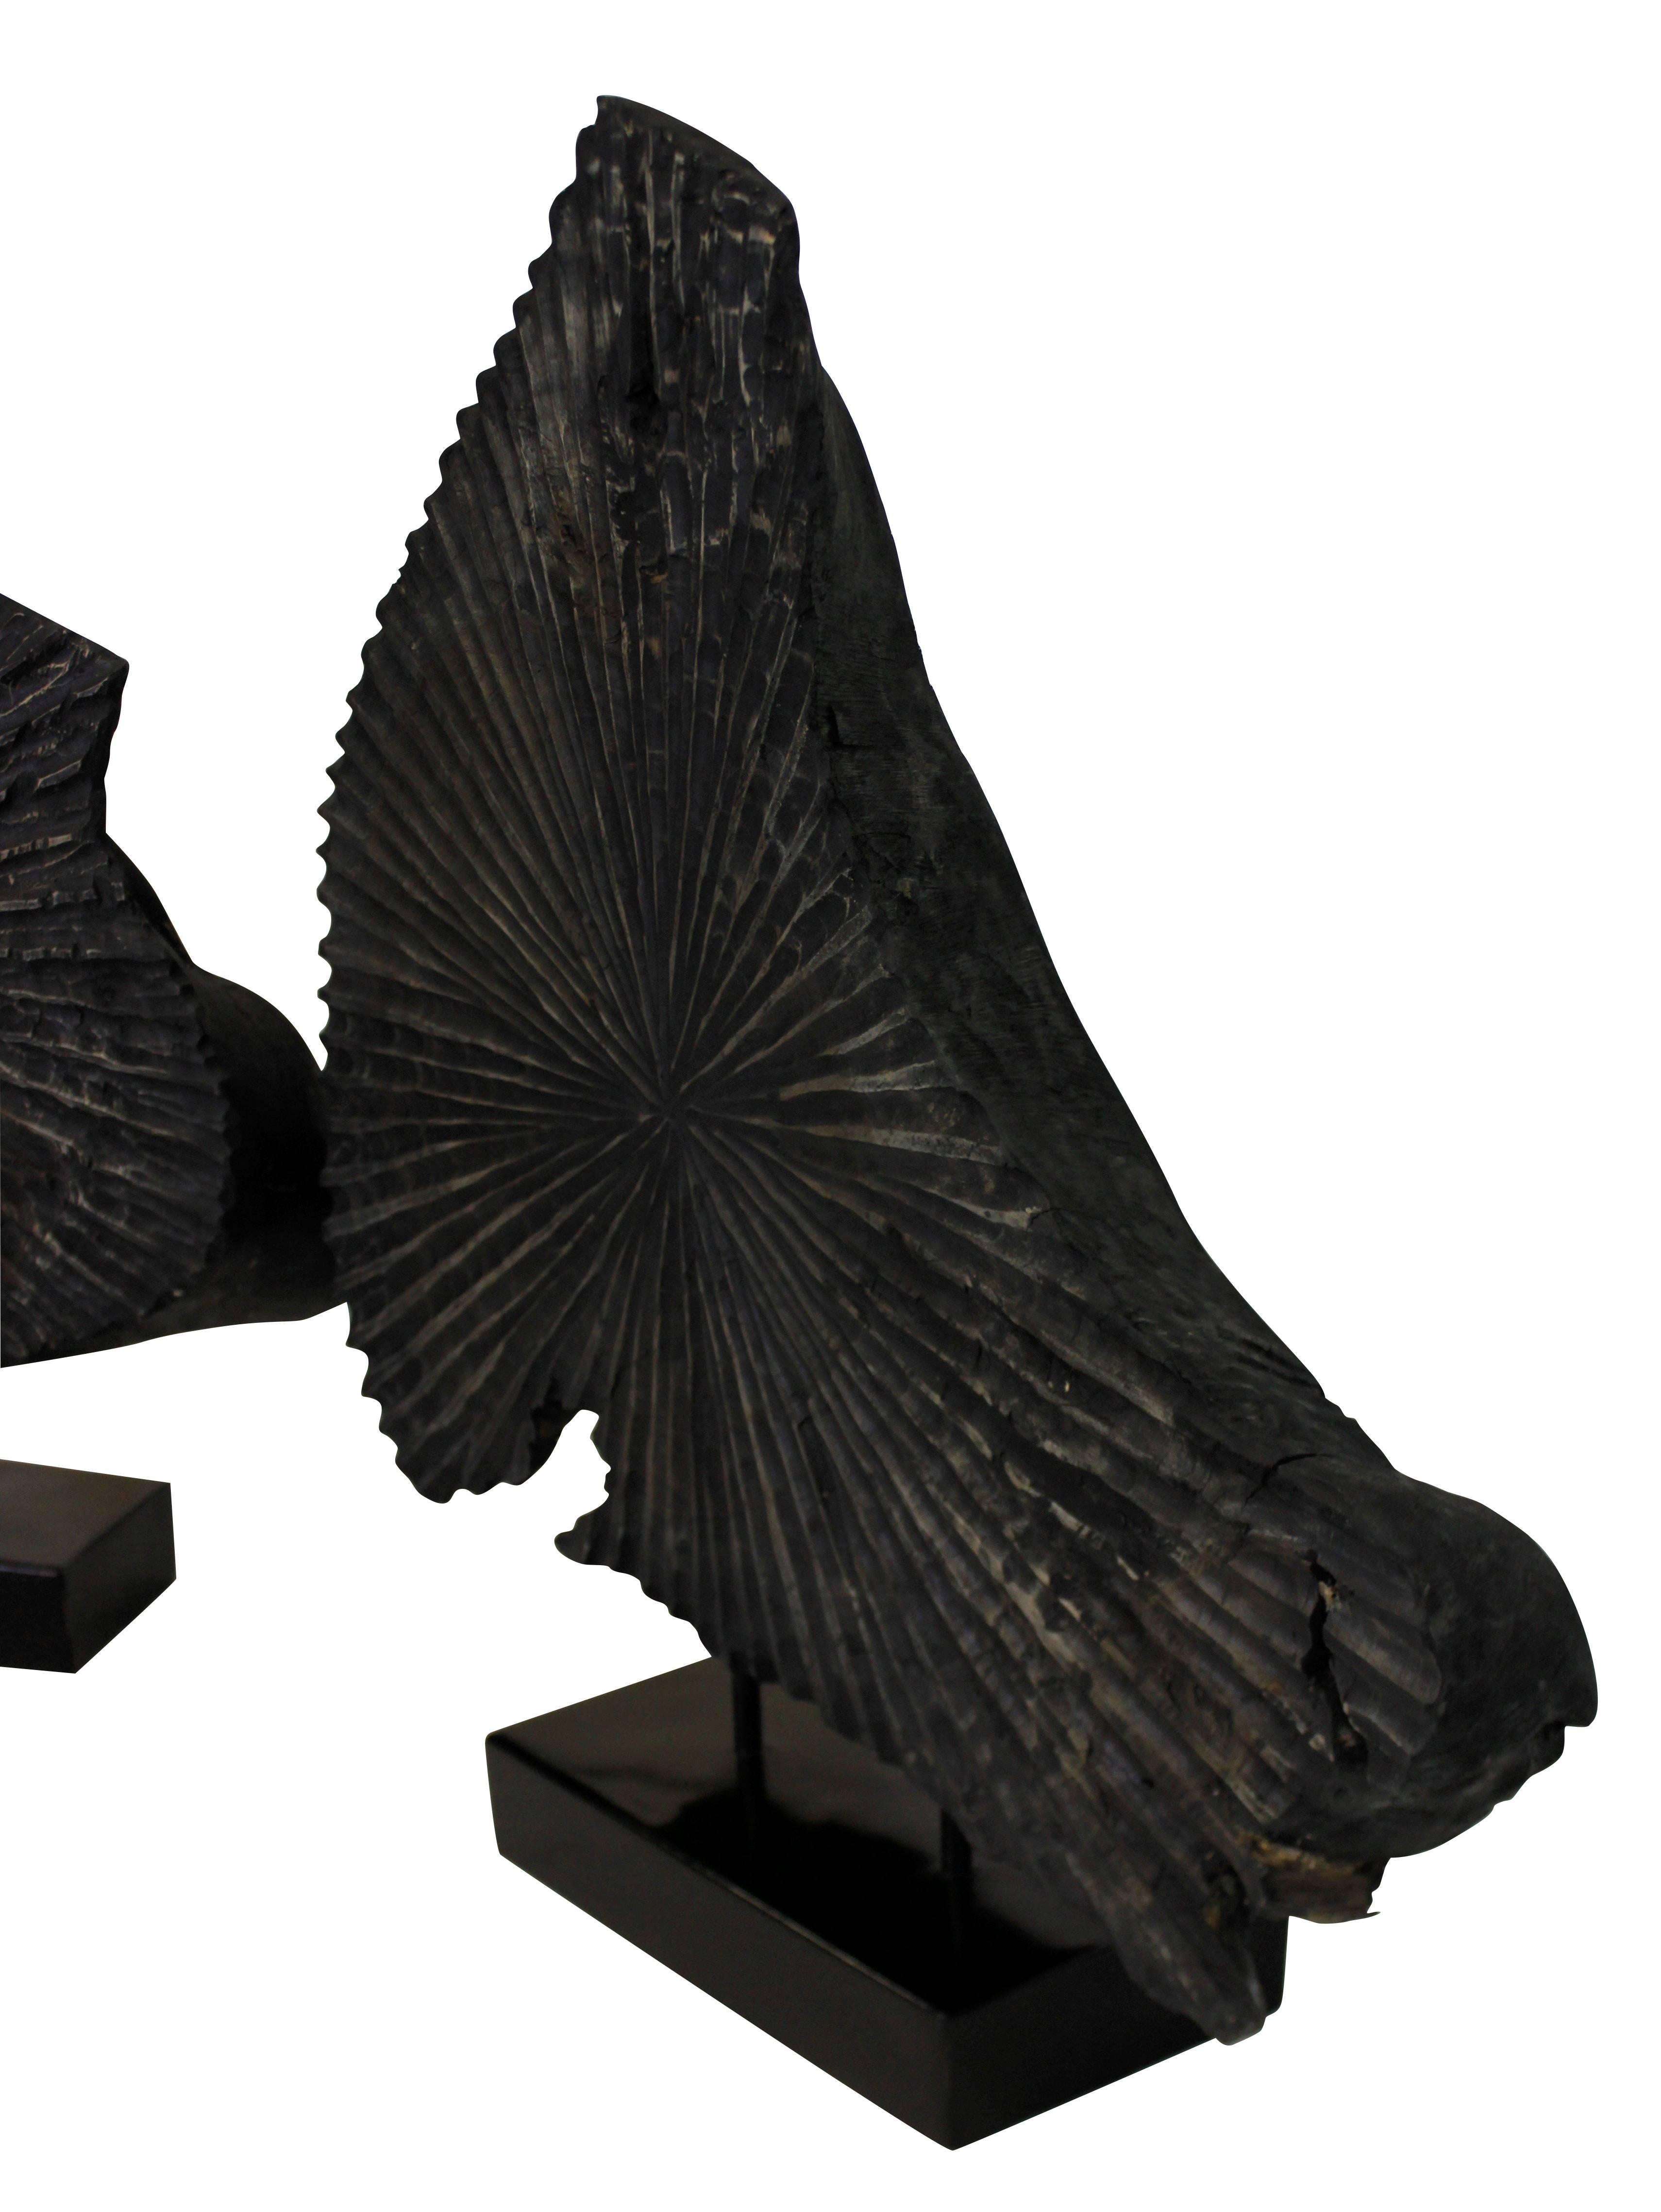 A pair of large sliced tree trunk sculptures, mounted on black lacquered stands.

 